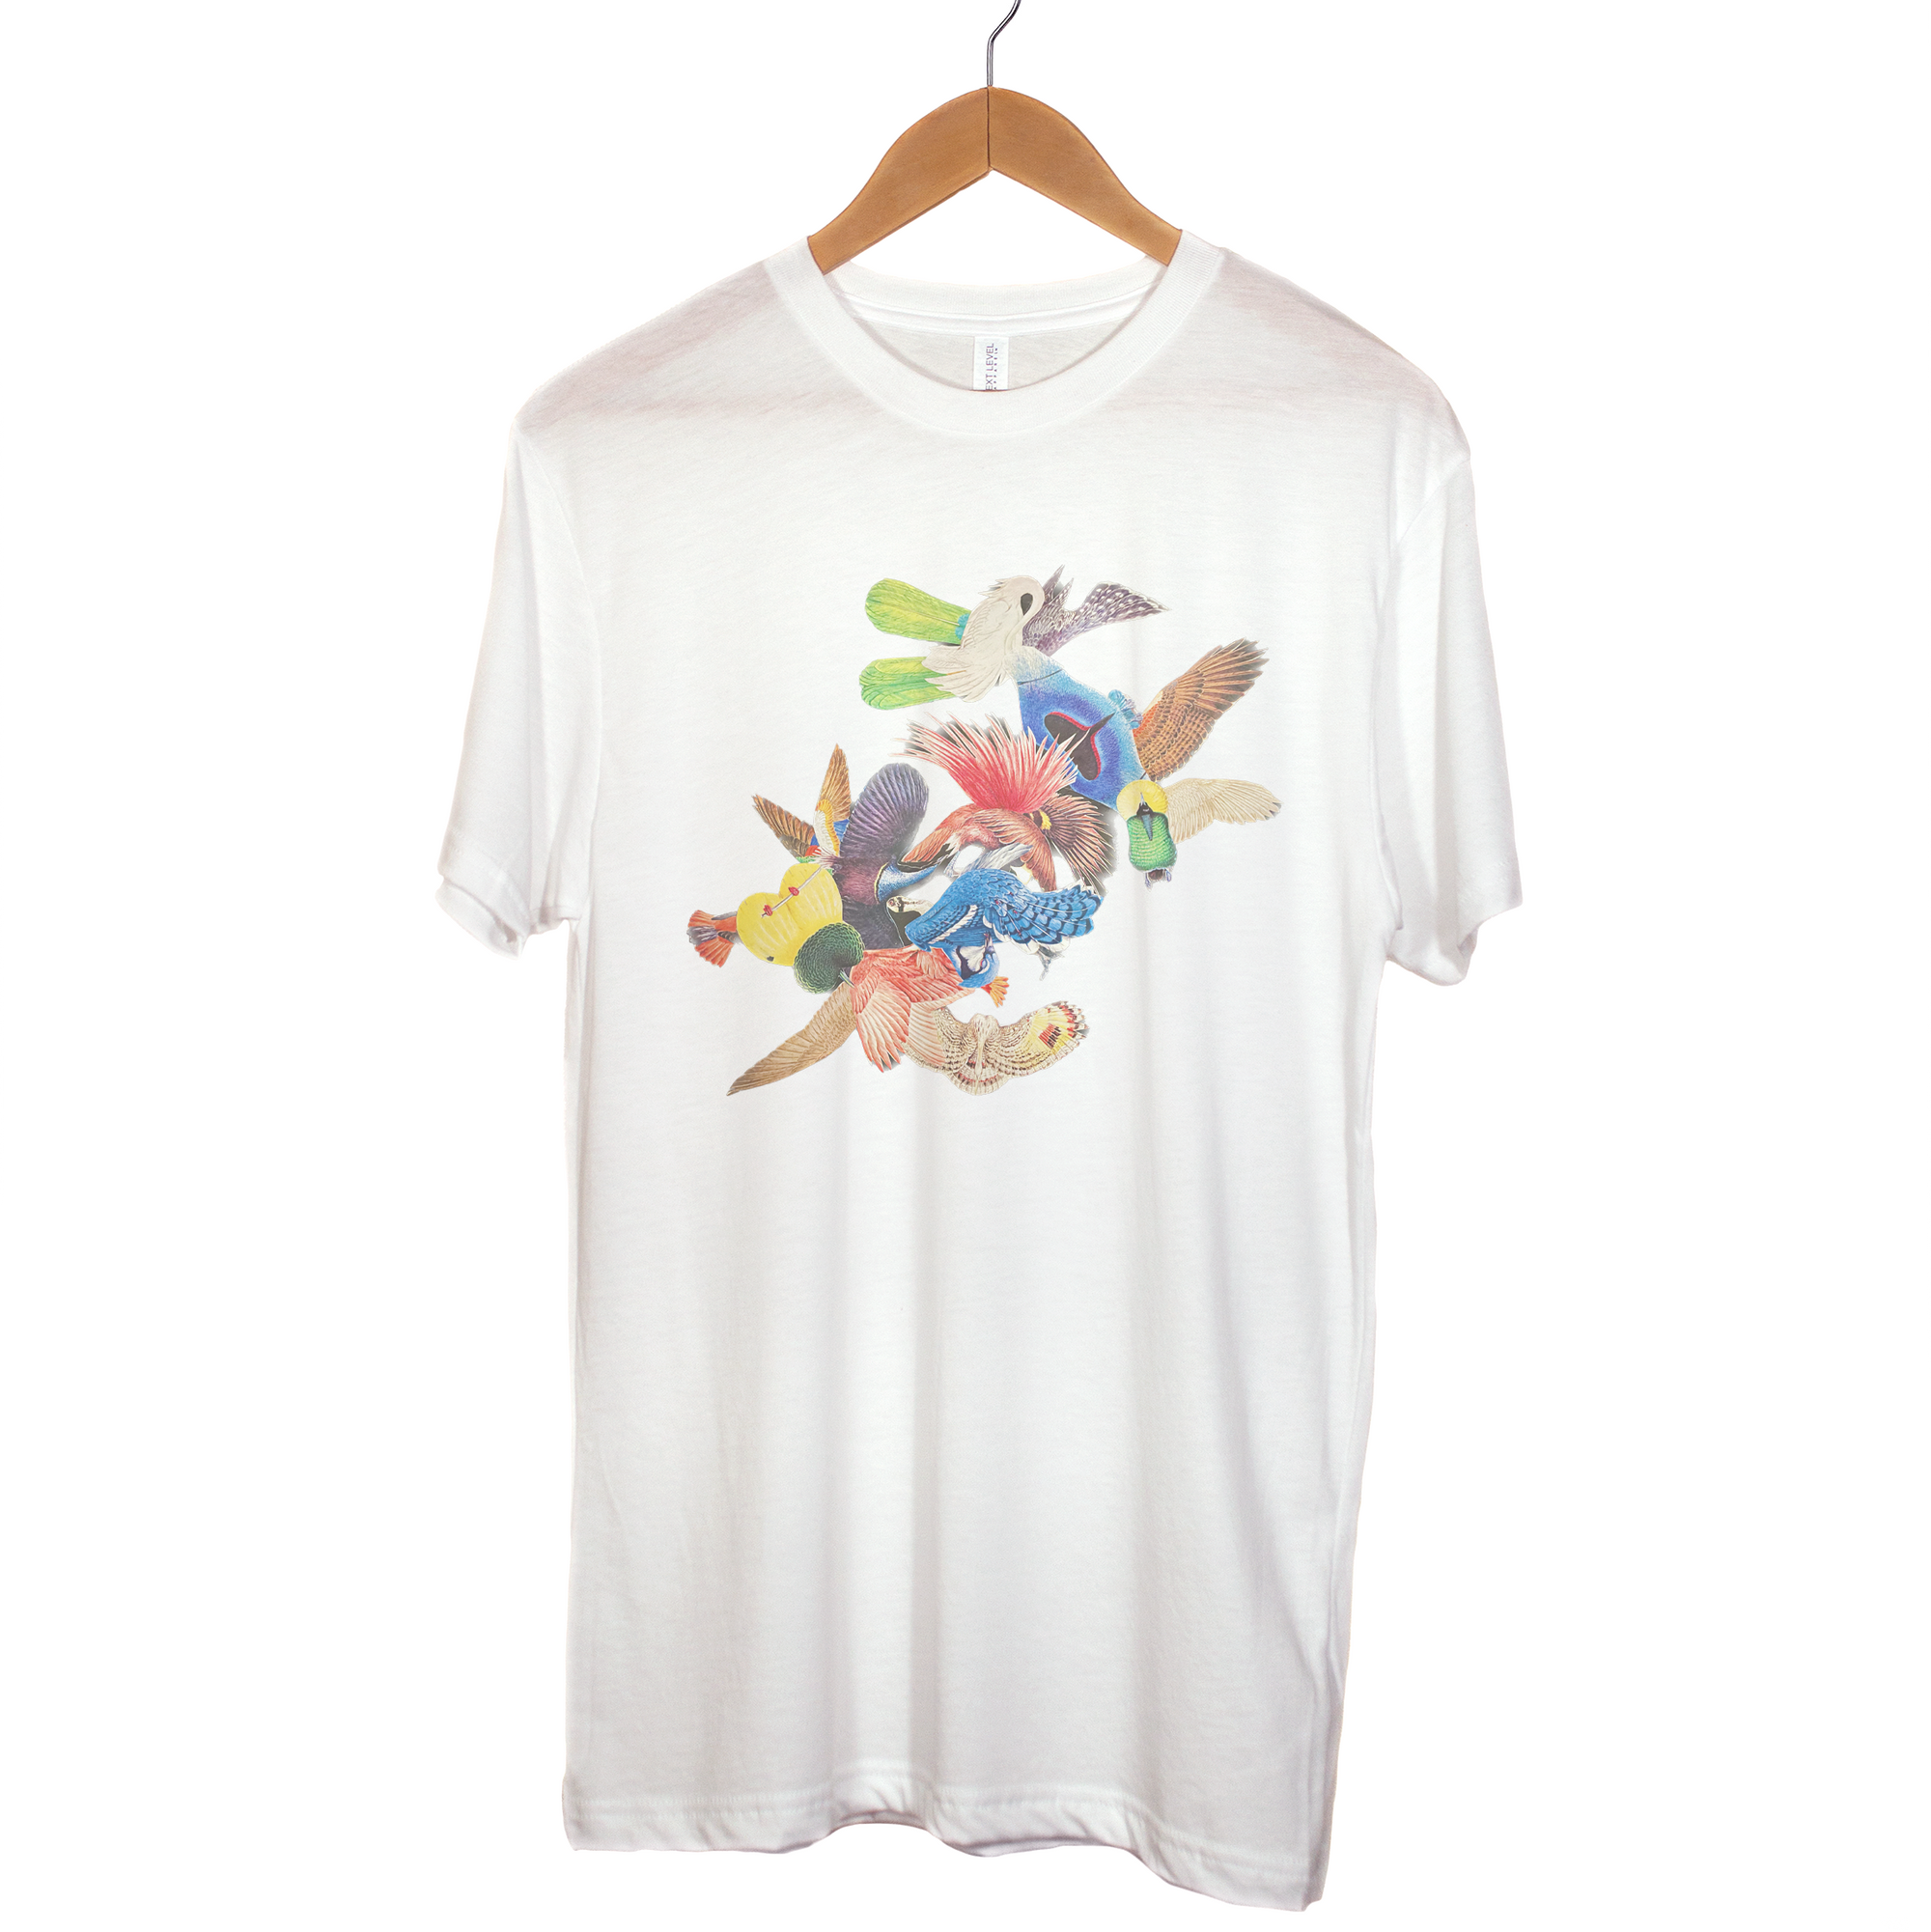 "Birds of a Feather" - Triblend Tee